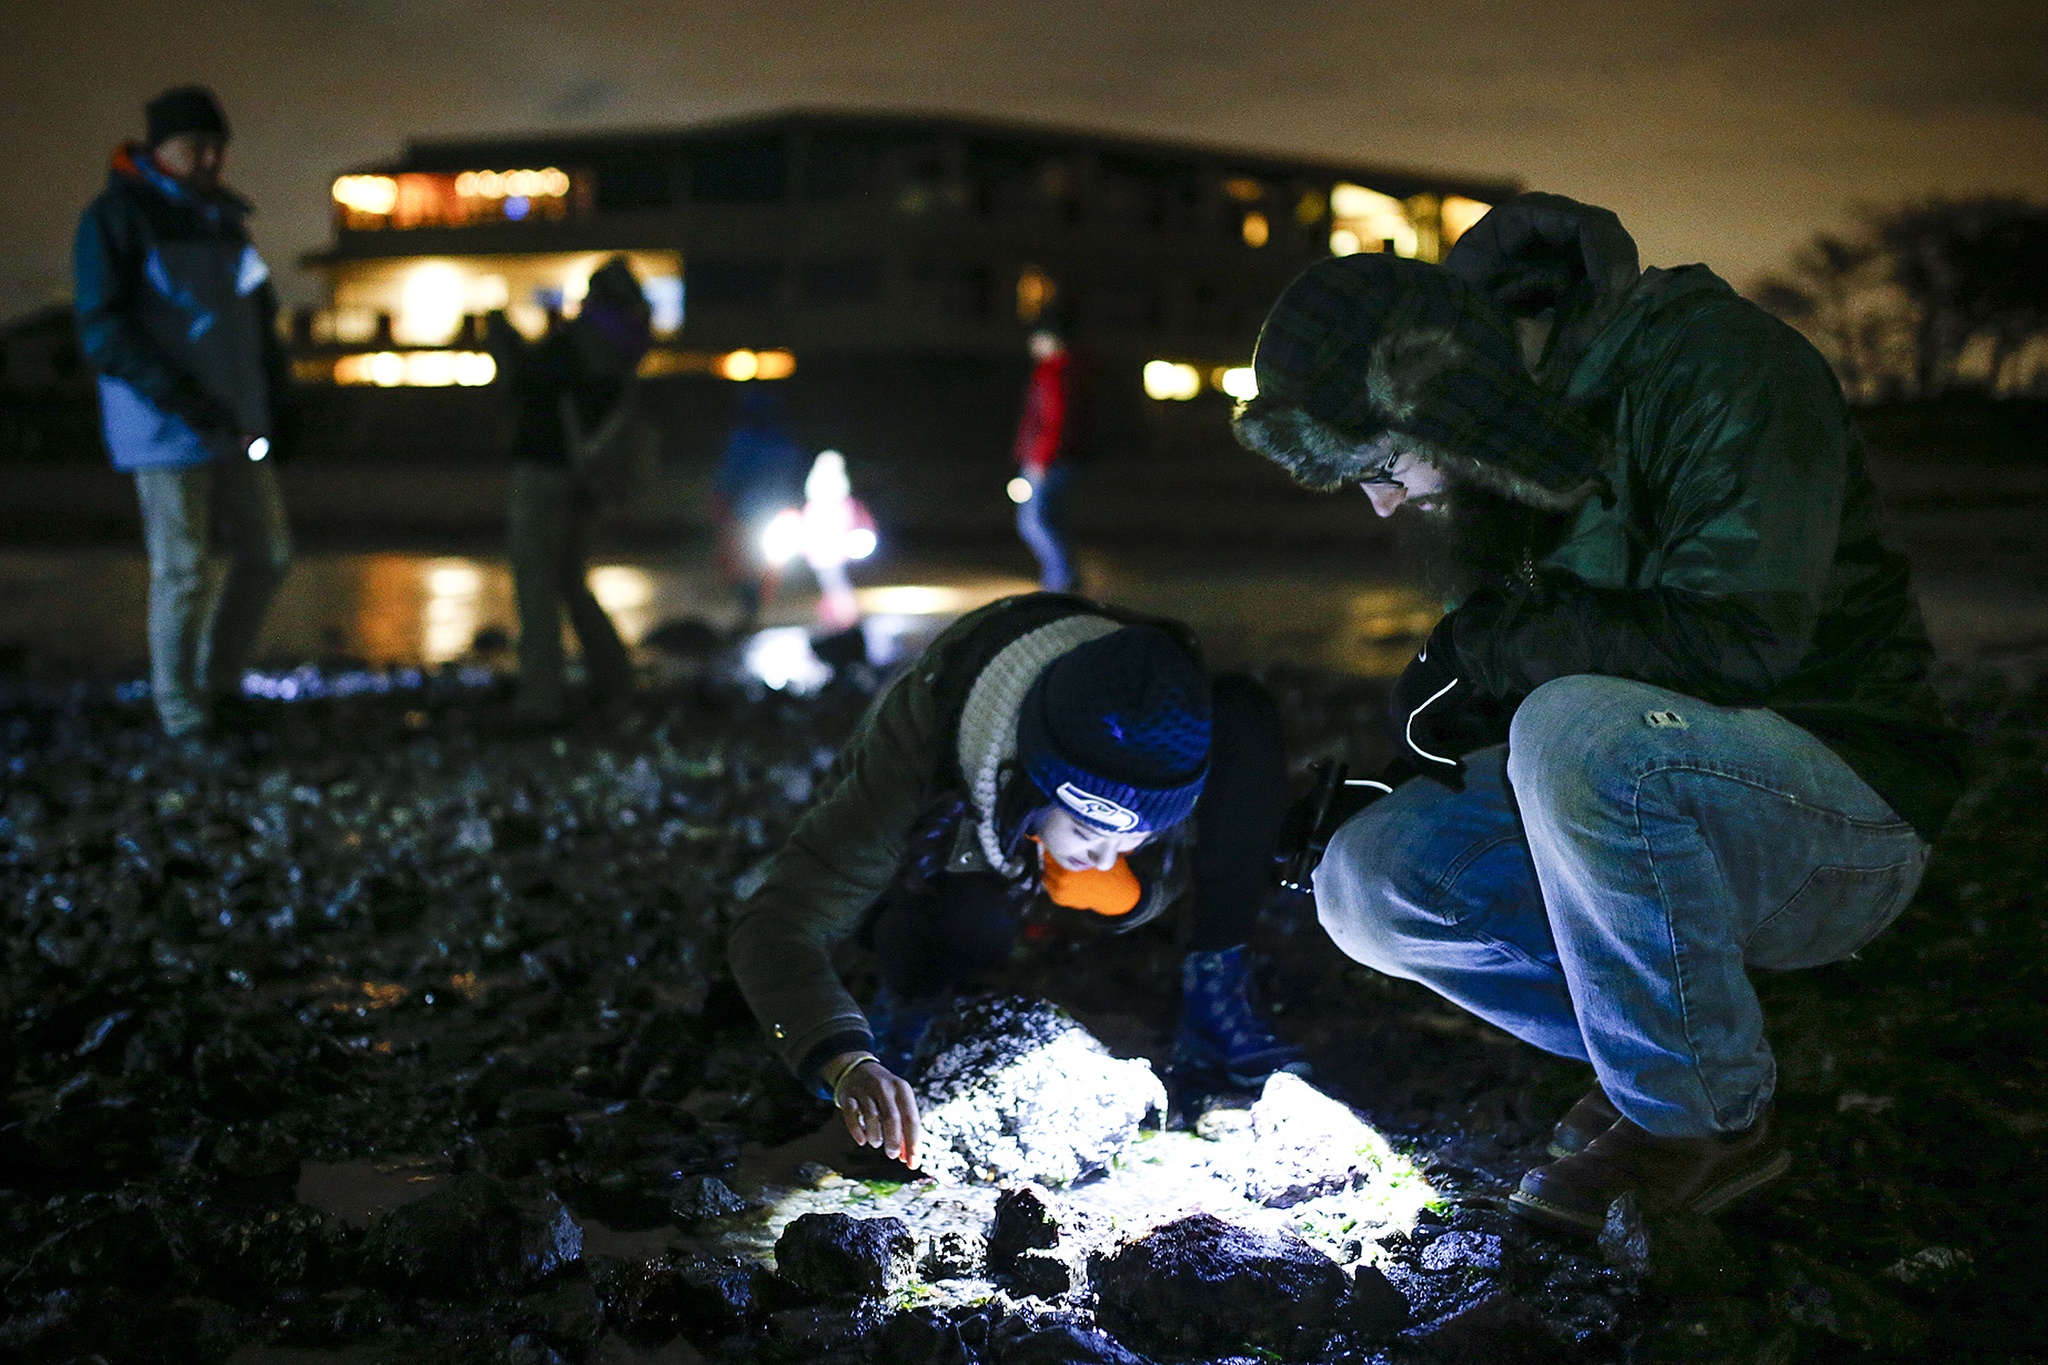 Laura Han (center), of Lynnwood, and Derek Arterburn (right), of Everett, use the glow of a flashlight to look for marine life during a beach walk after dark in Edmonds on Tuesday, Feb. 7. (Ian Terry / The Herald)